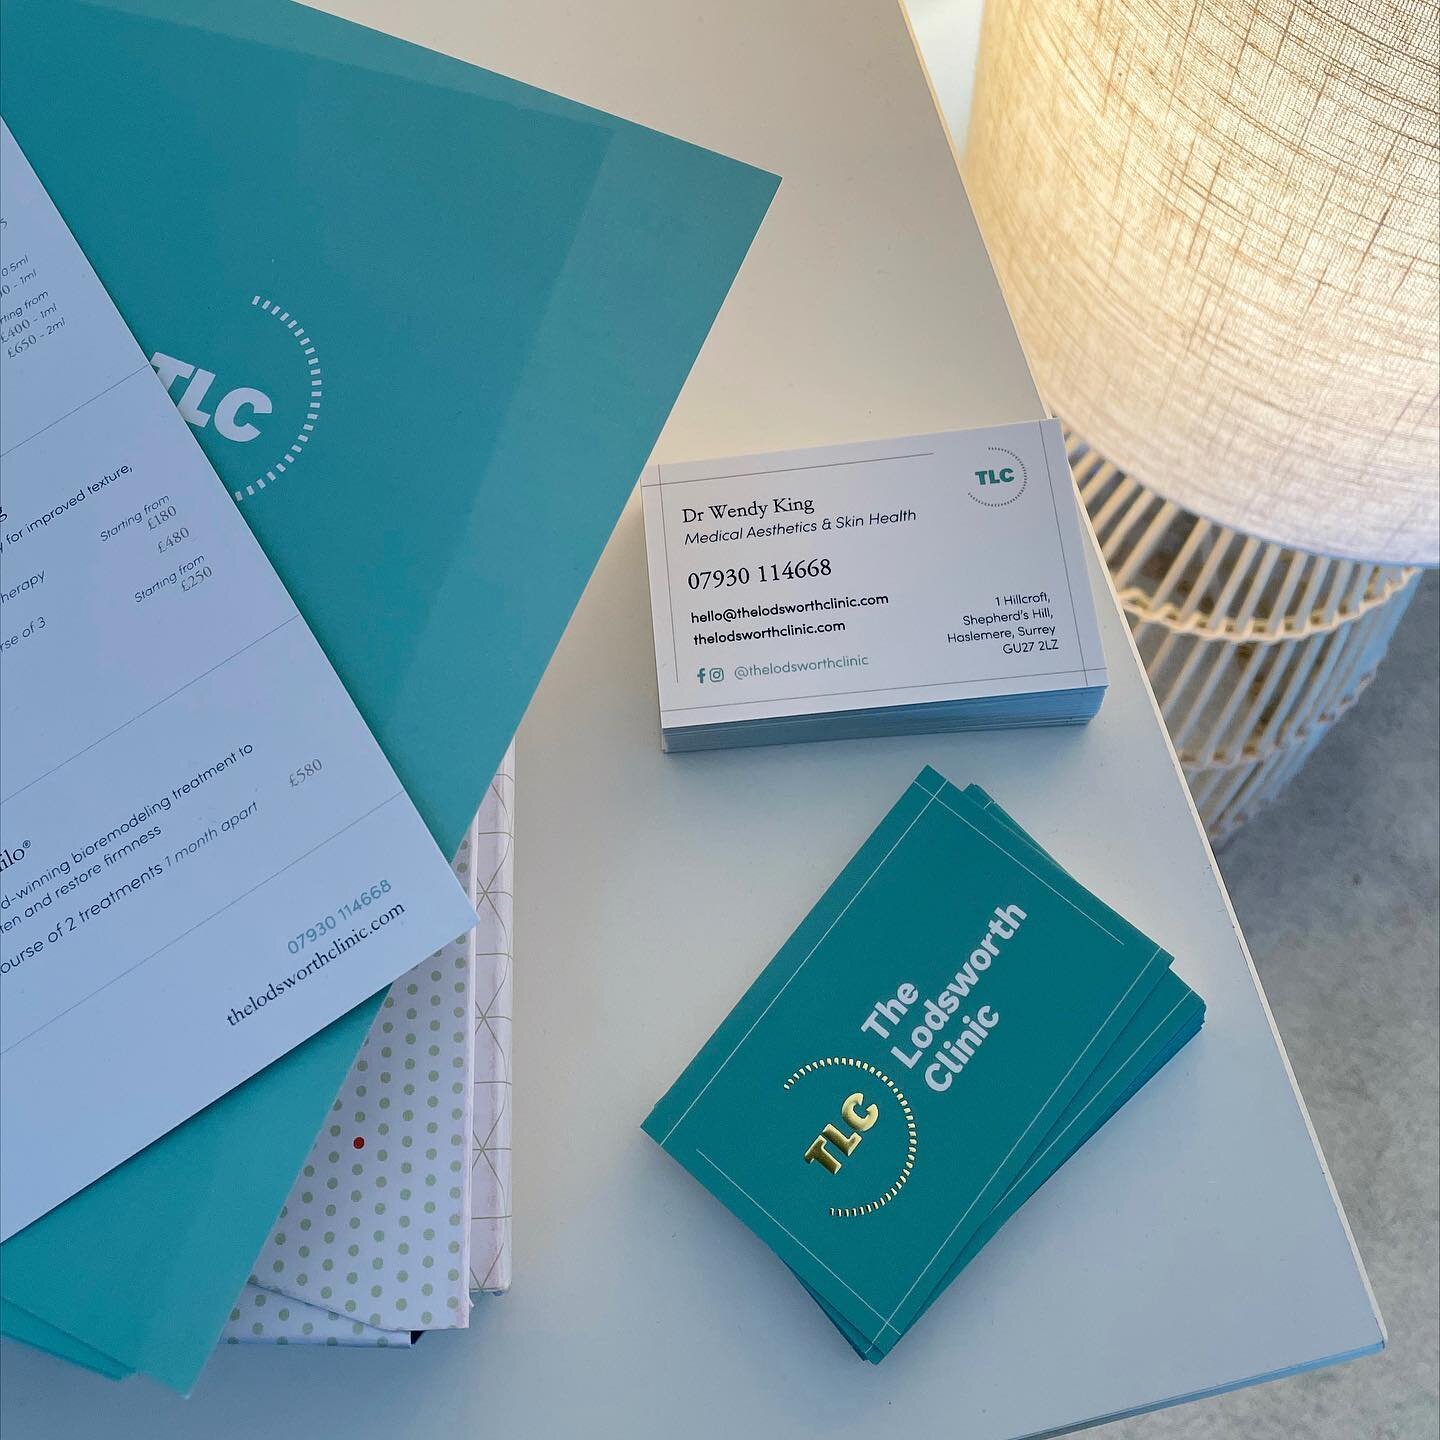 A few pieces for @thelodsworthclinic 💎

Lots of luxe paper and sleek finishing touches for this Medical Aesthetics &amp; Skin Health clinic by Dr Wendy King 🥼